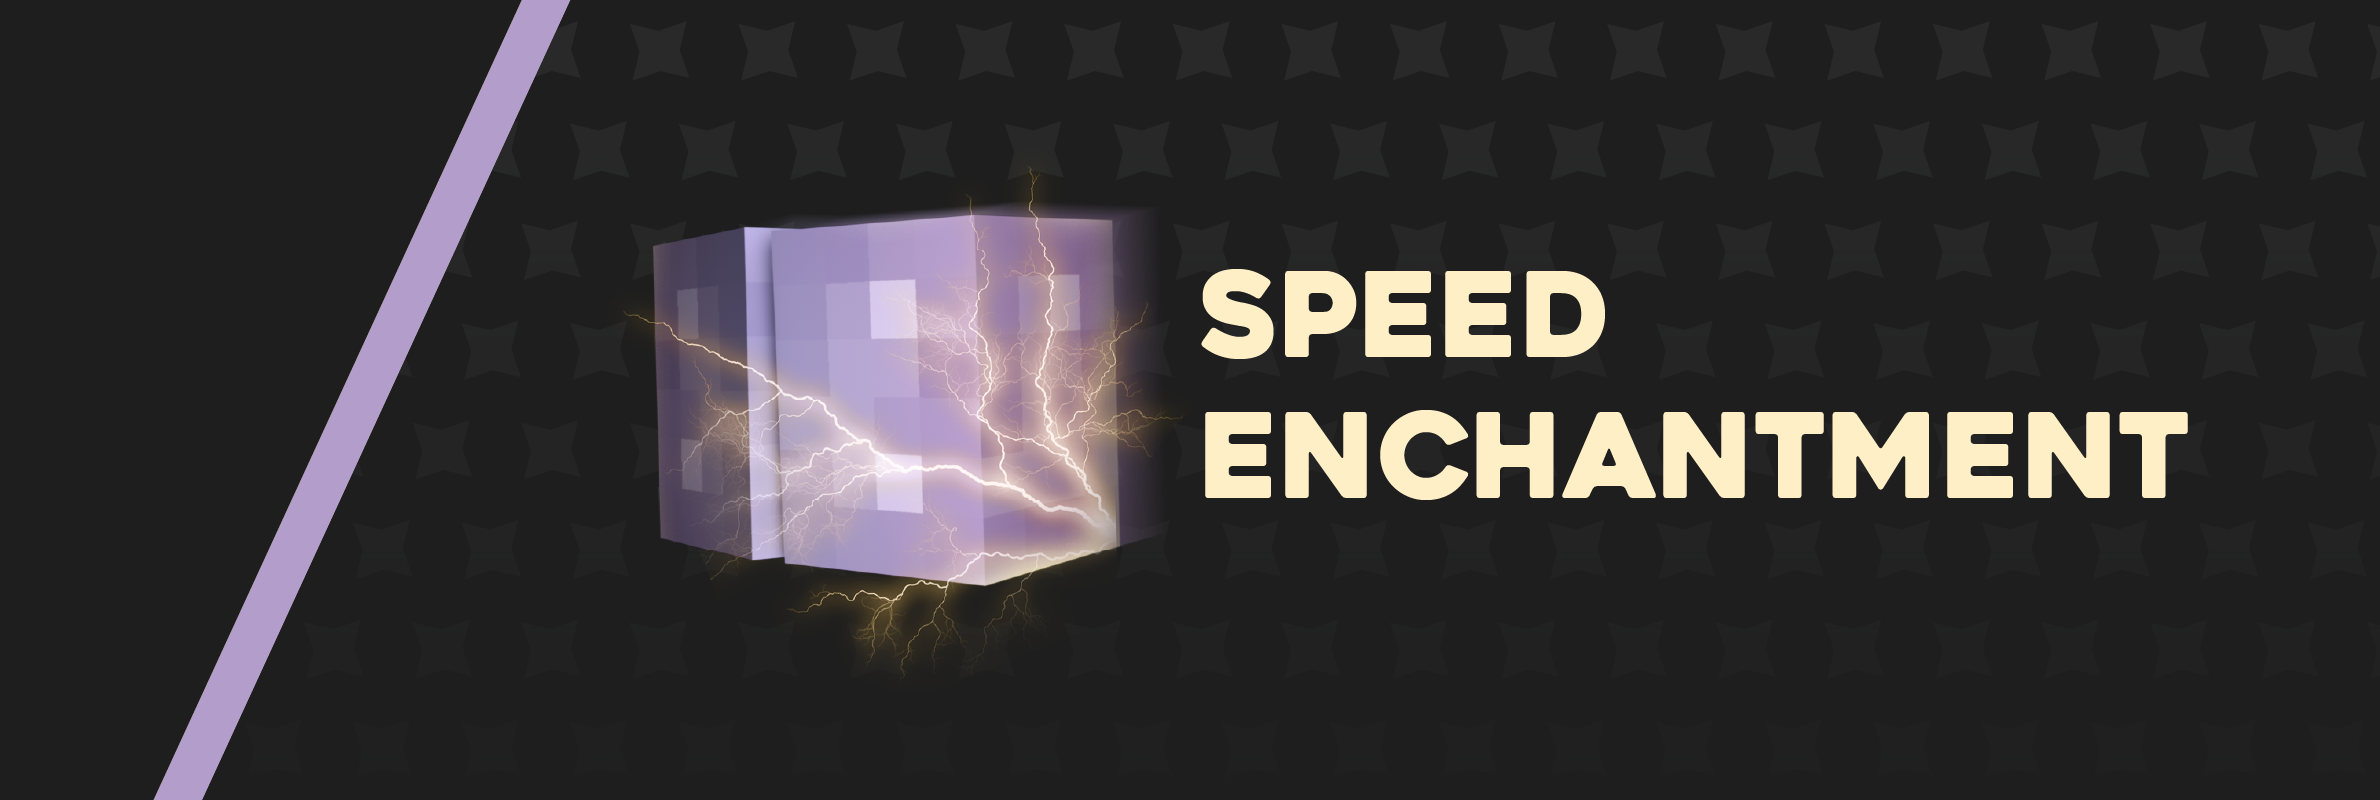 Attack Speed Enchantment - Minecraft Mods - CurseForge